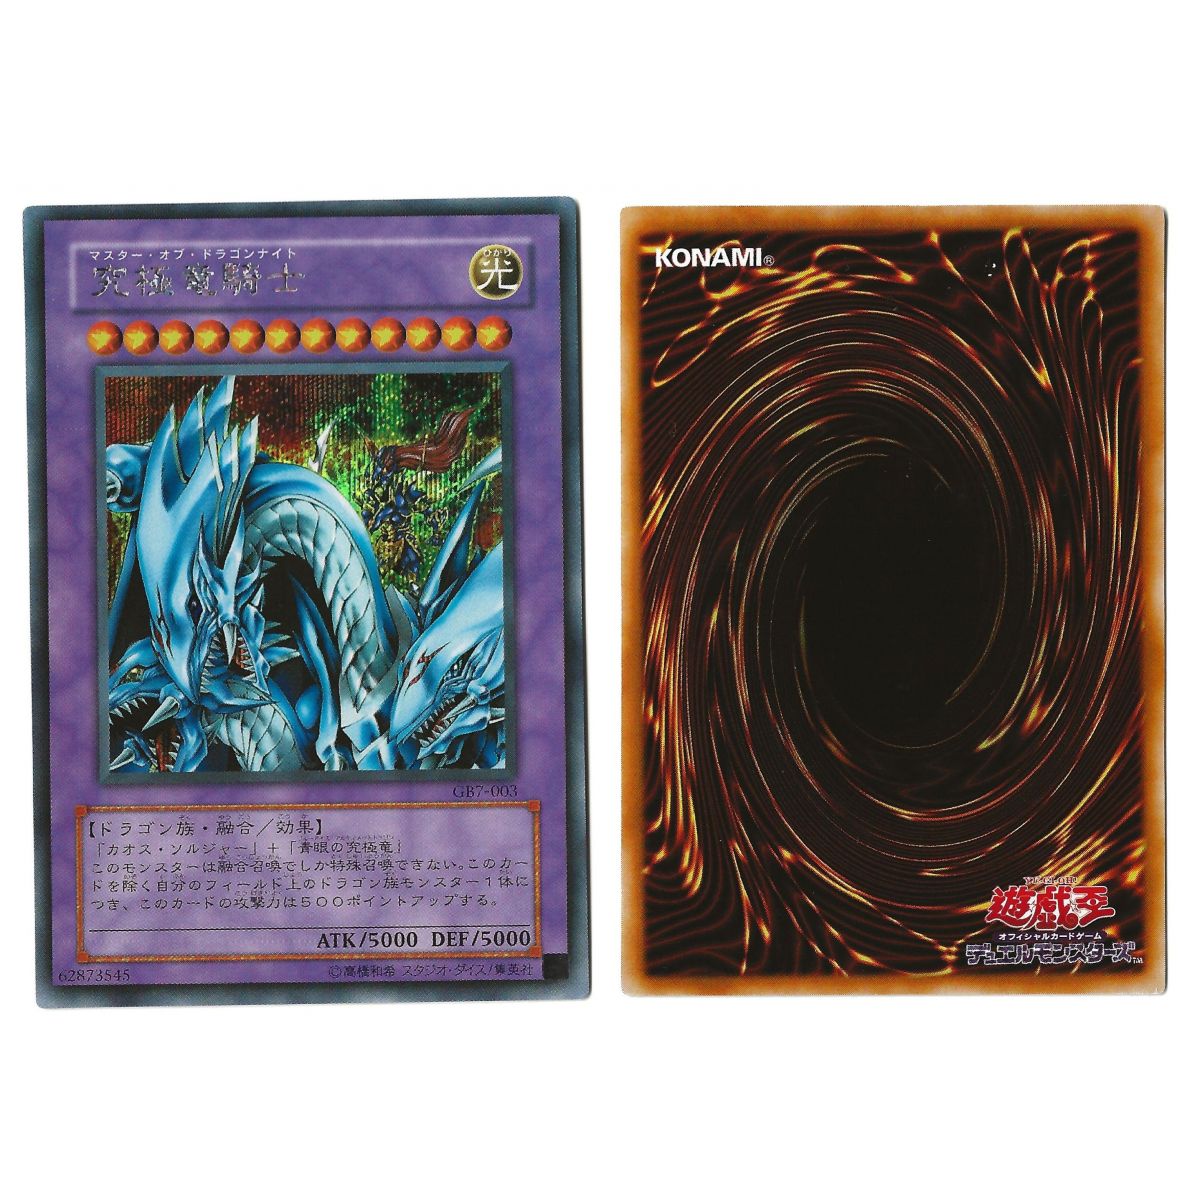 Dragon Master Knight  GB7-003 Yu-Gi-Oh! Duel Monster 7 : The Duel City Legend Promotional Cards Secrete Rare Unlimited Japonais